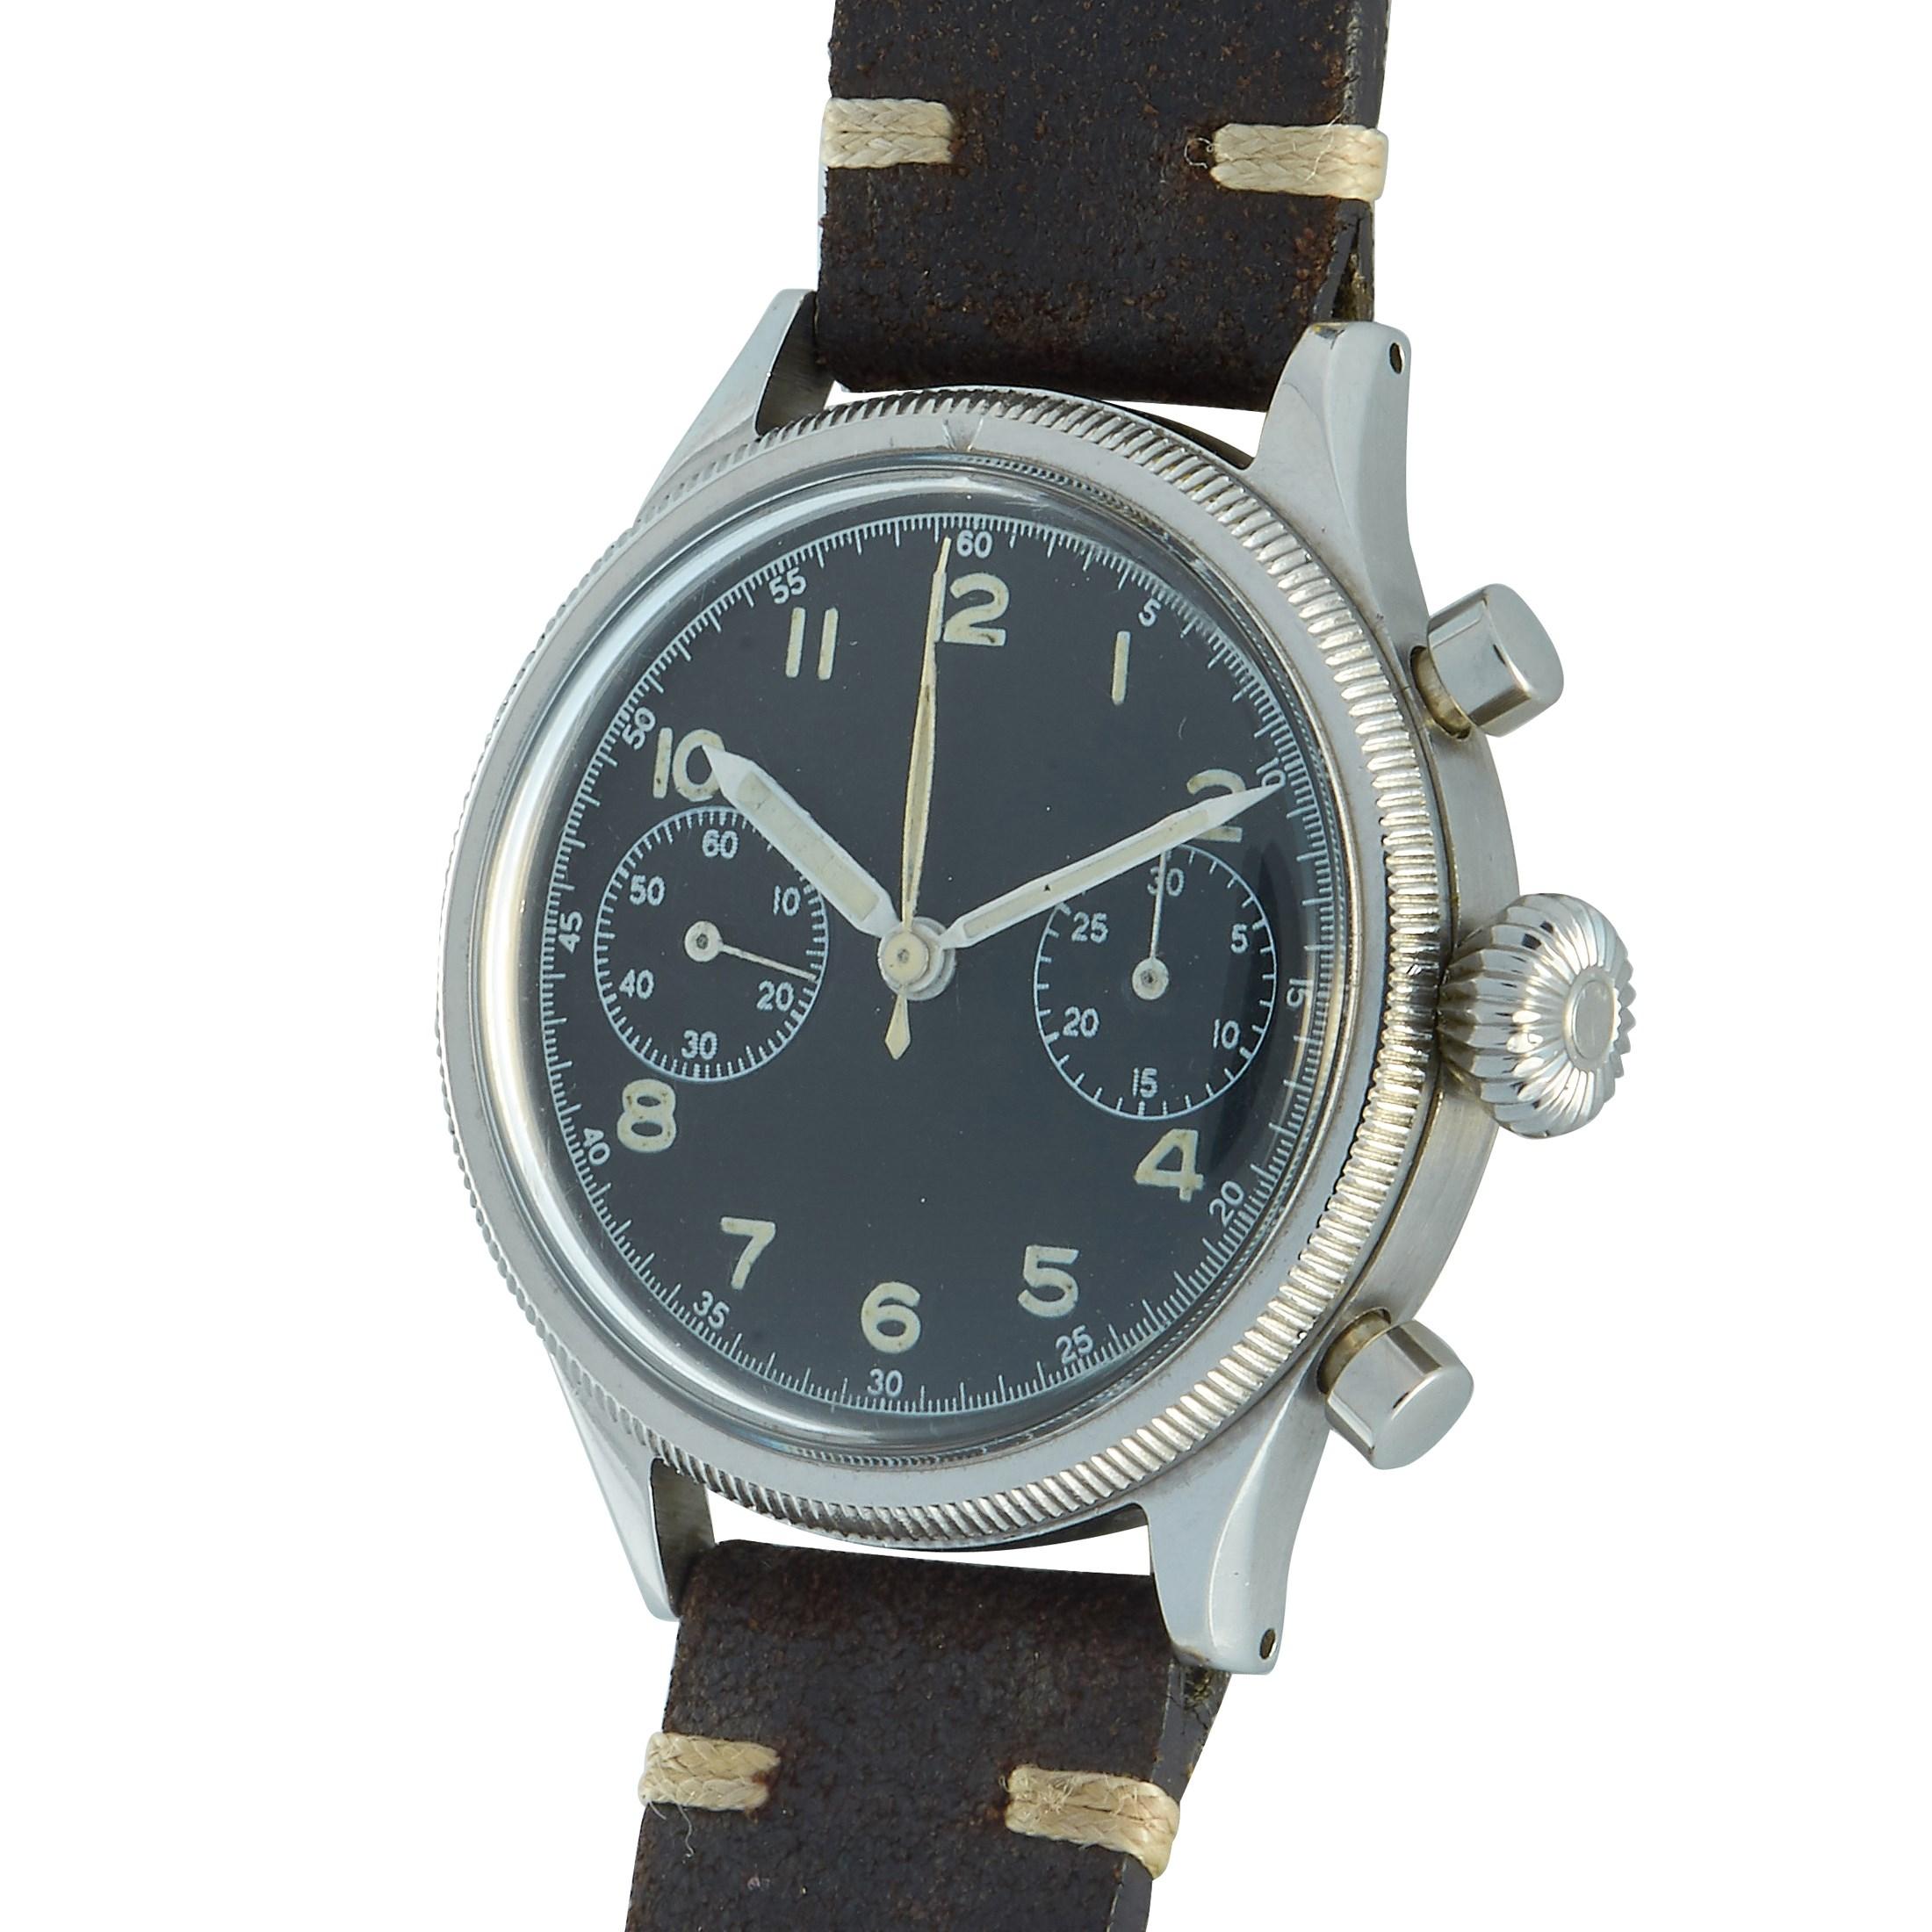 This rare Breguet Type XX (Type 20) was originally introduced in 1954 for the French military, and given the reference 5101/54. The French government commissioned Breguet to supply the watches to the Air Force, Naval Air Arm, and CEV. The Type 20